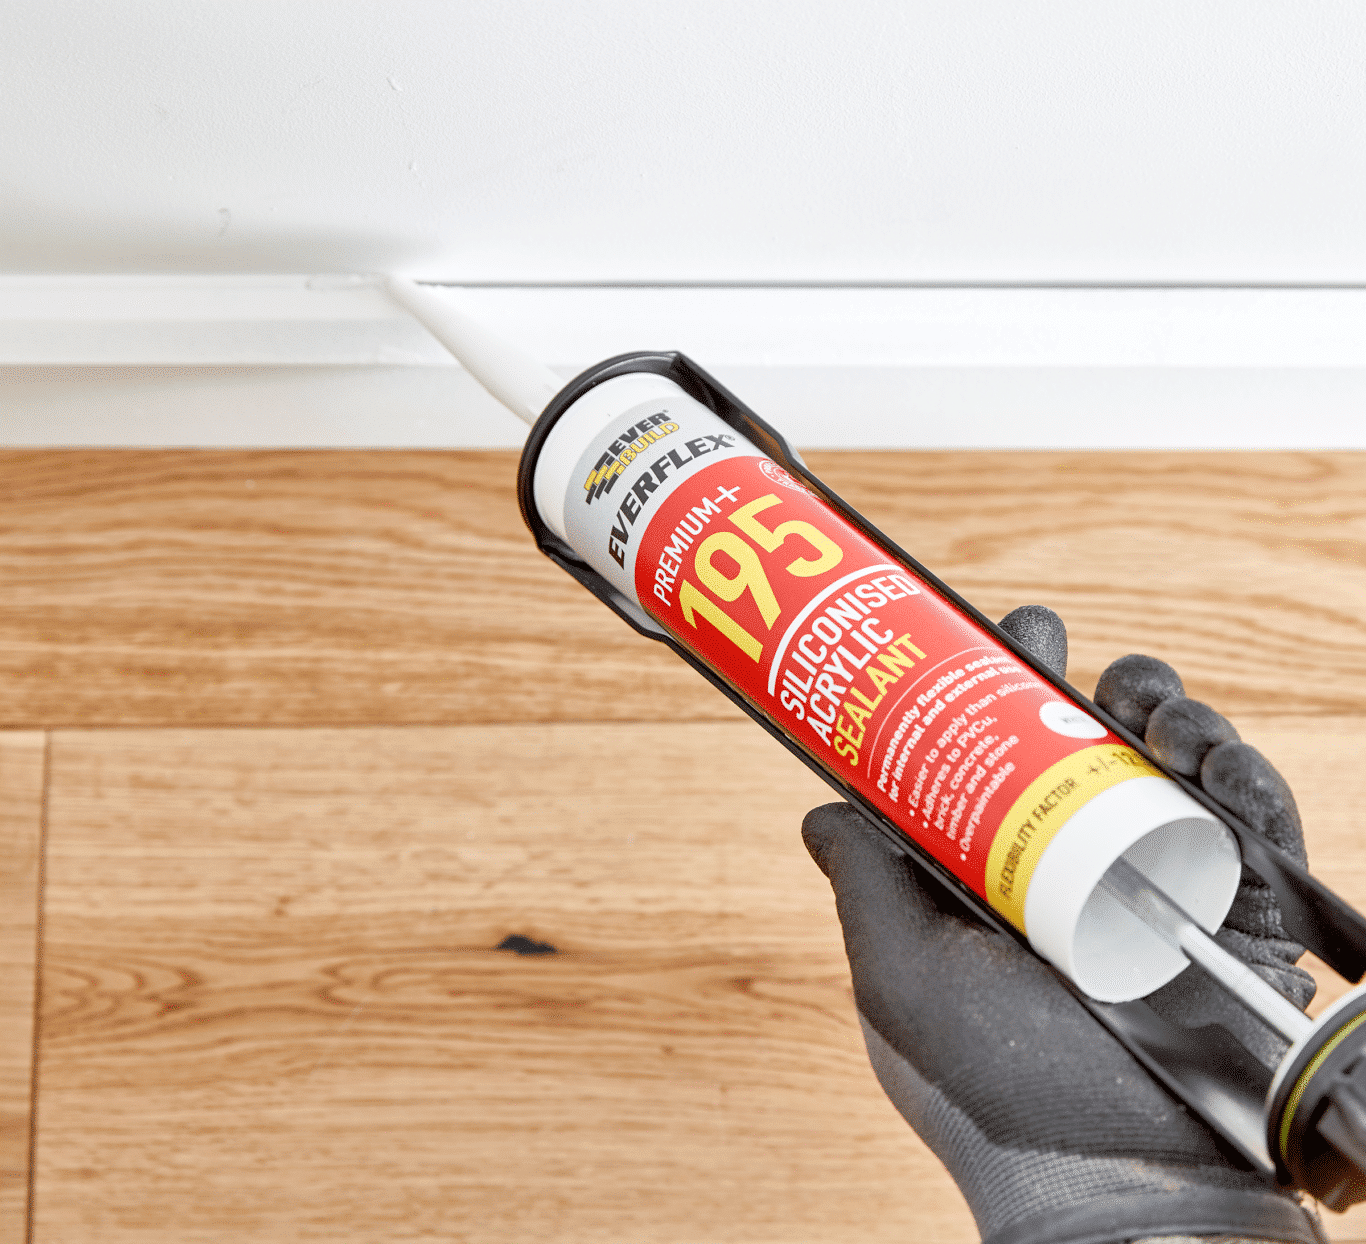 Everbuild Everflex Siliconised Acrylic Sealant being applied to skirtingboard — Everbuild Everflex Packaging Design